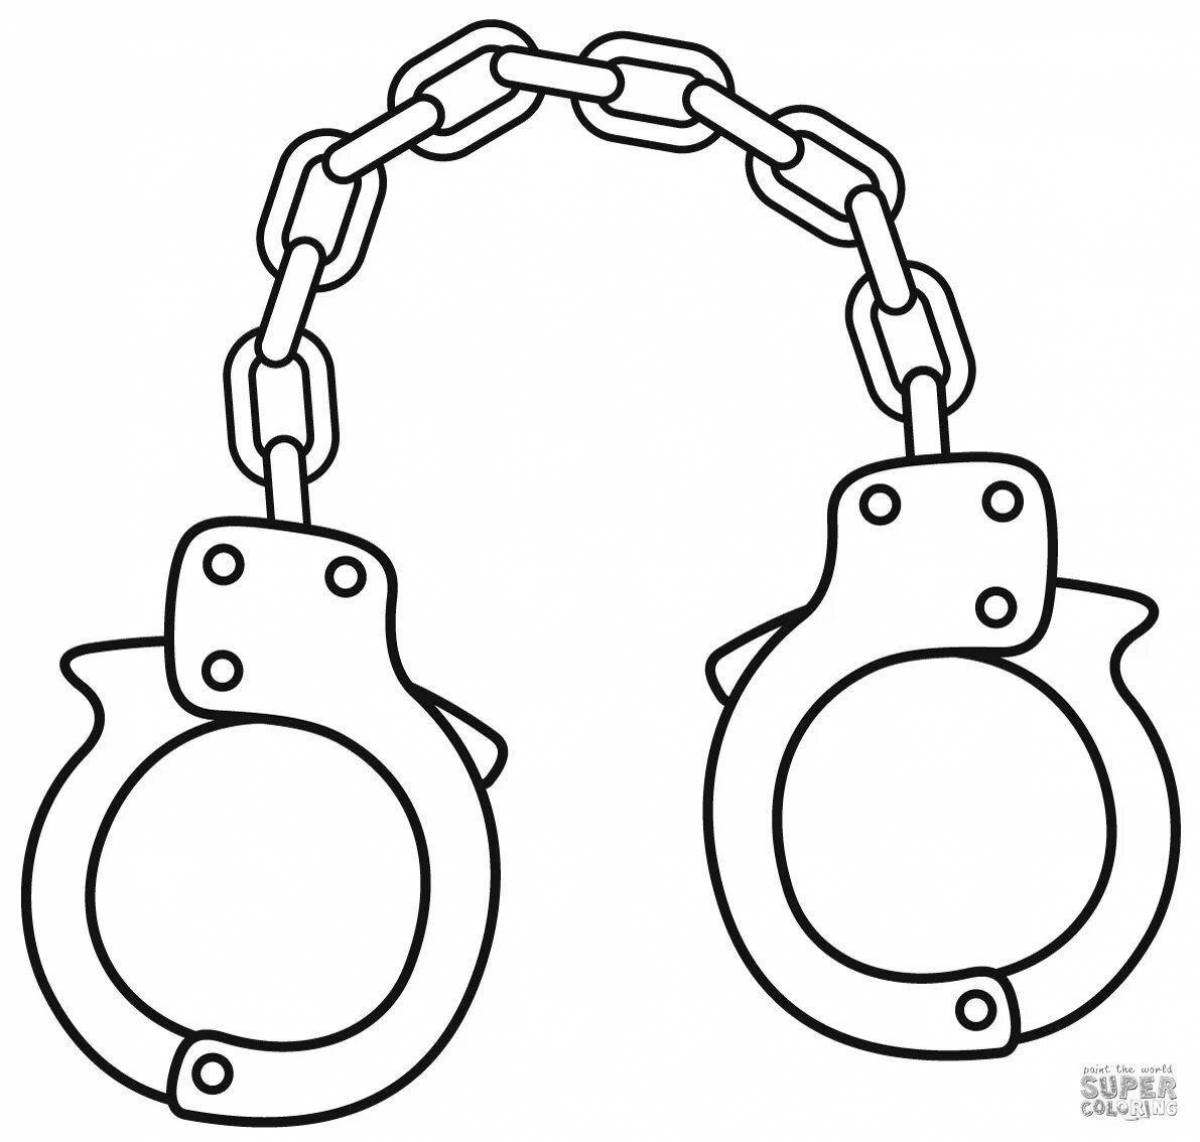 Fancy handcuffs coloring page